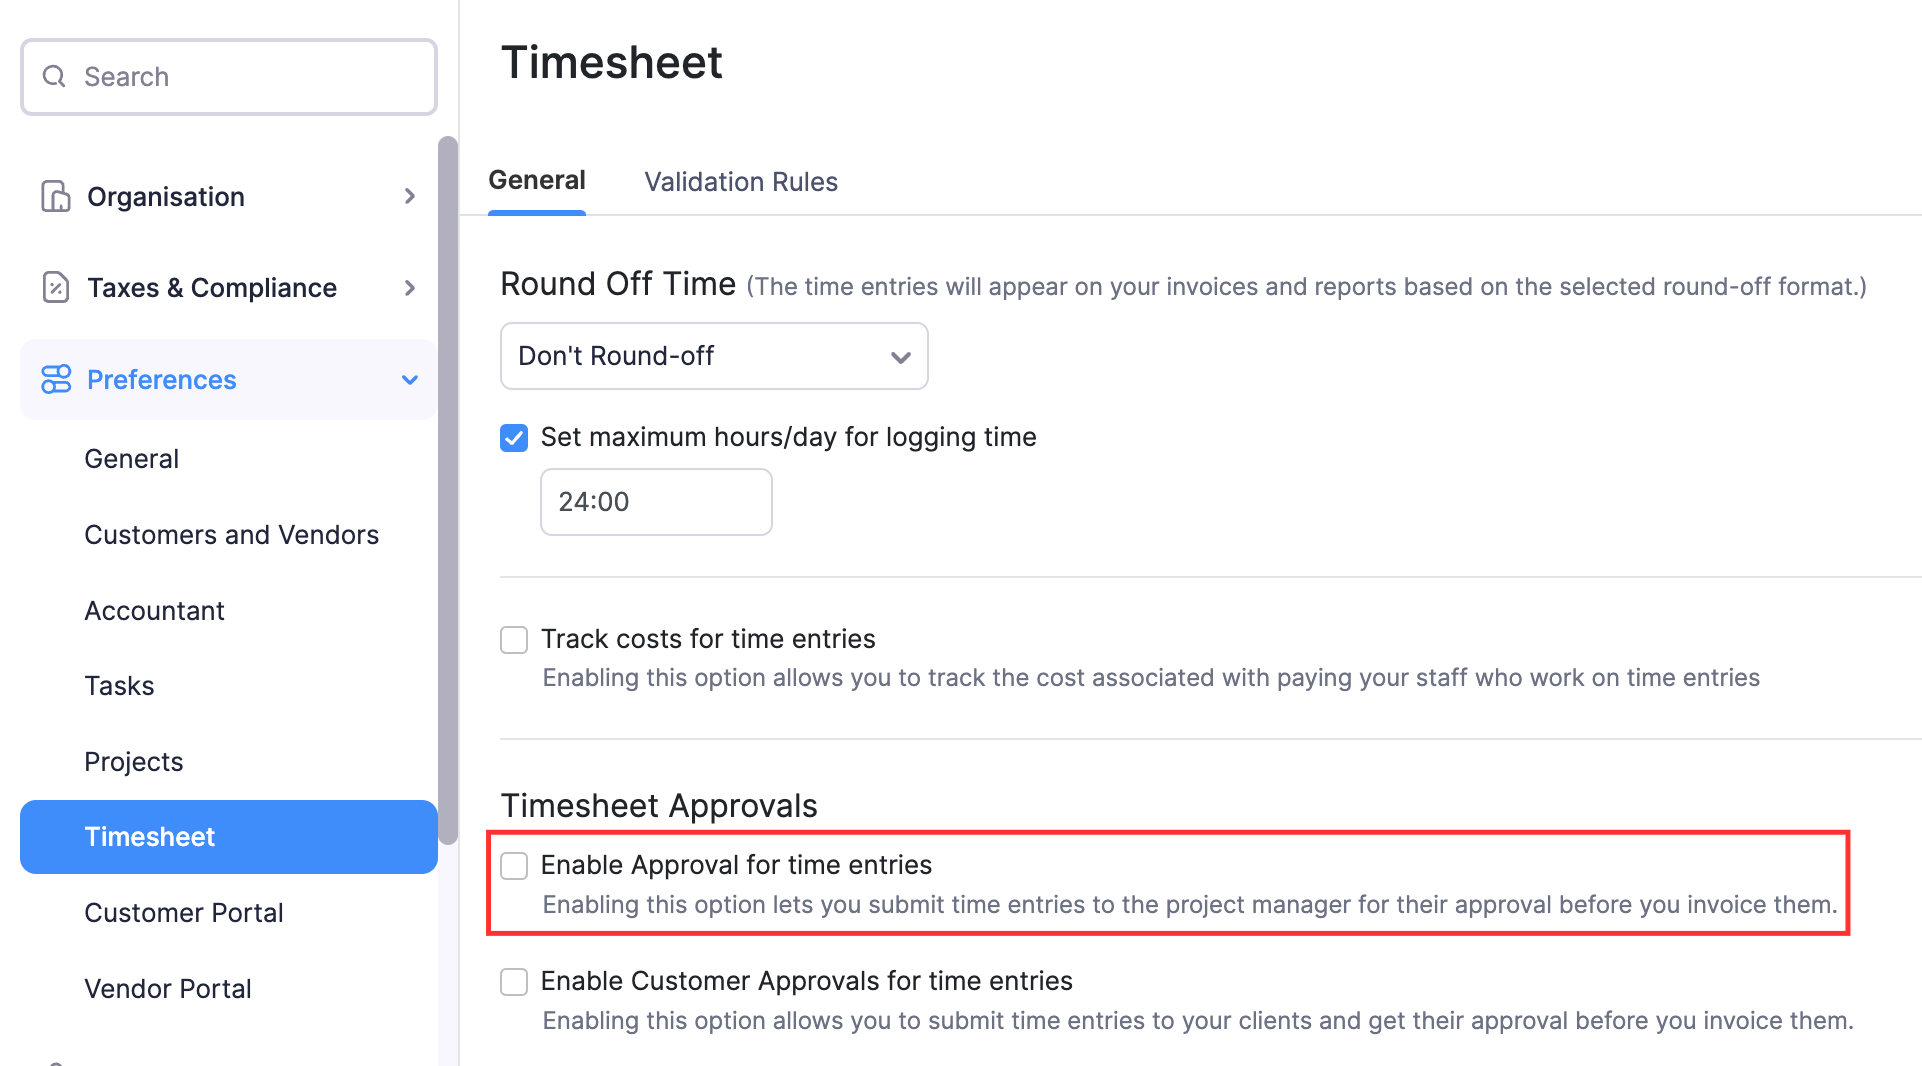 Uncheck the Enable Approvals for time entries option